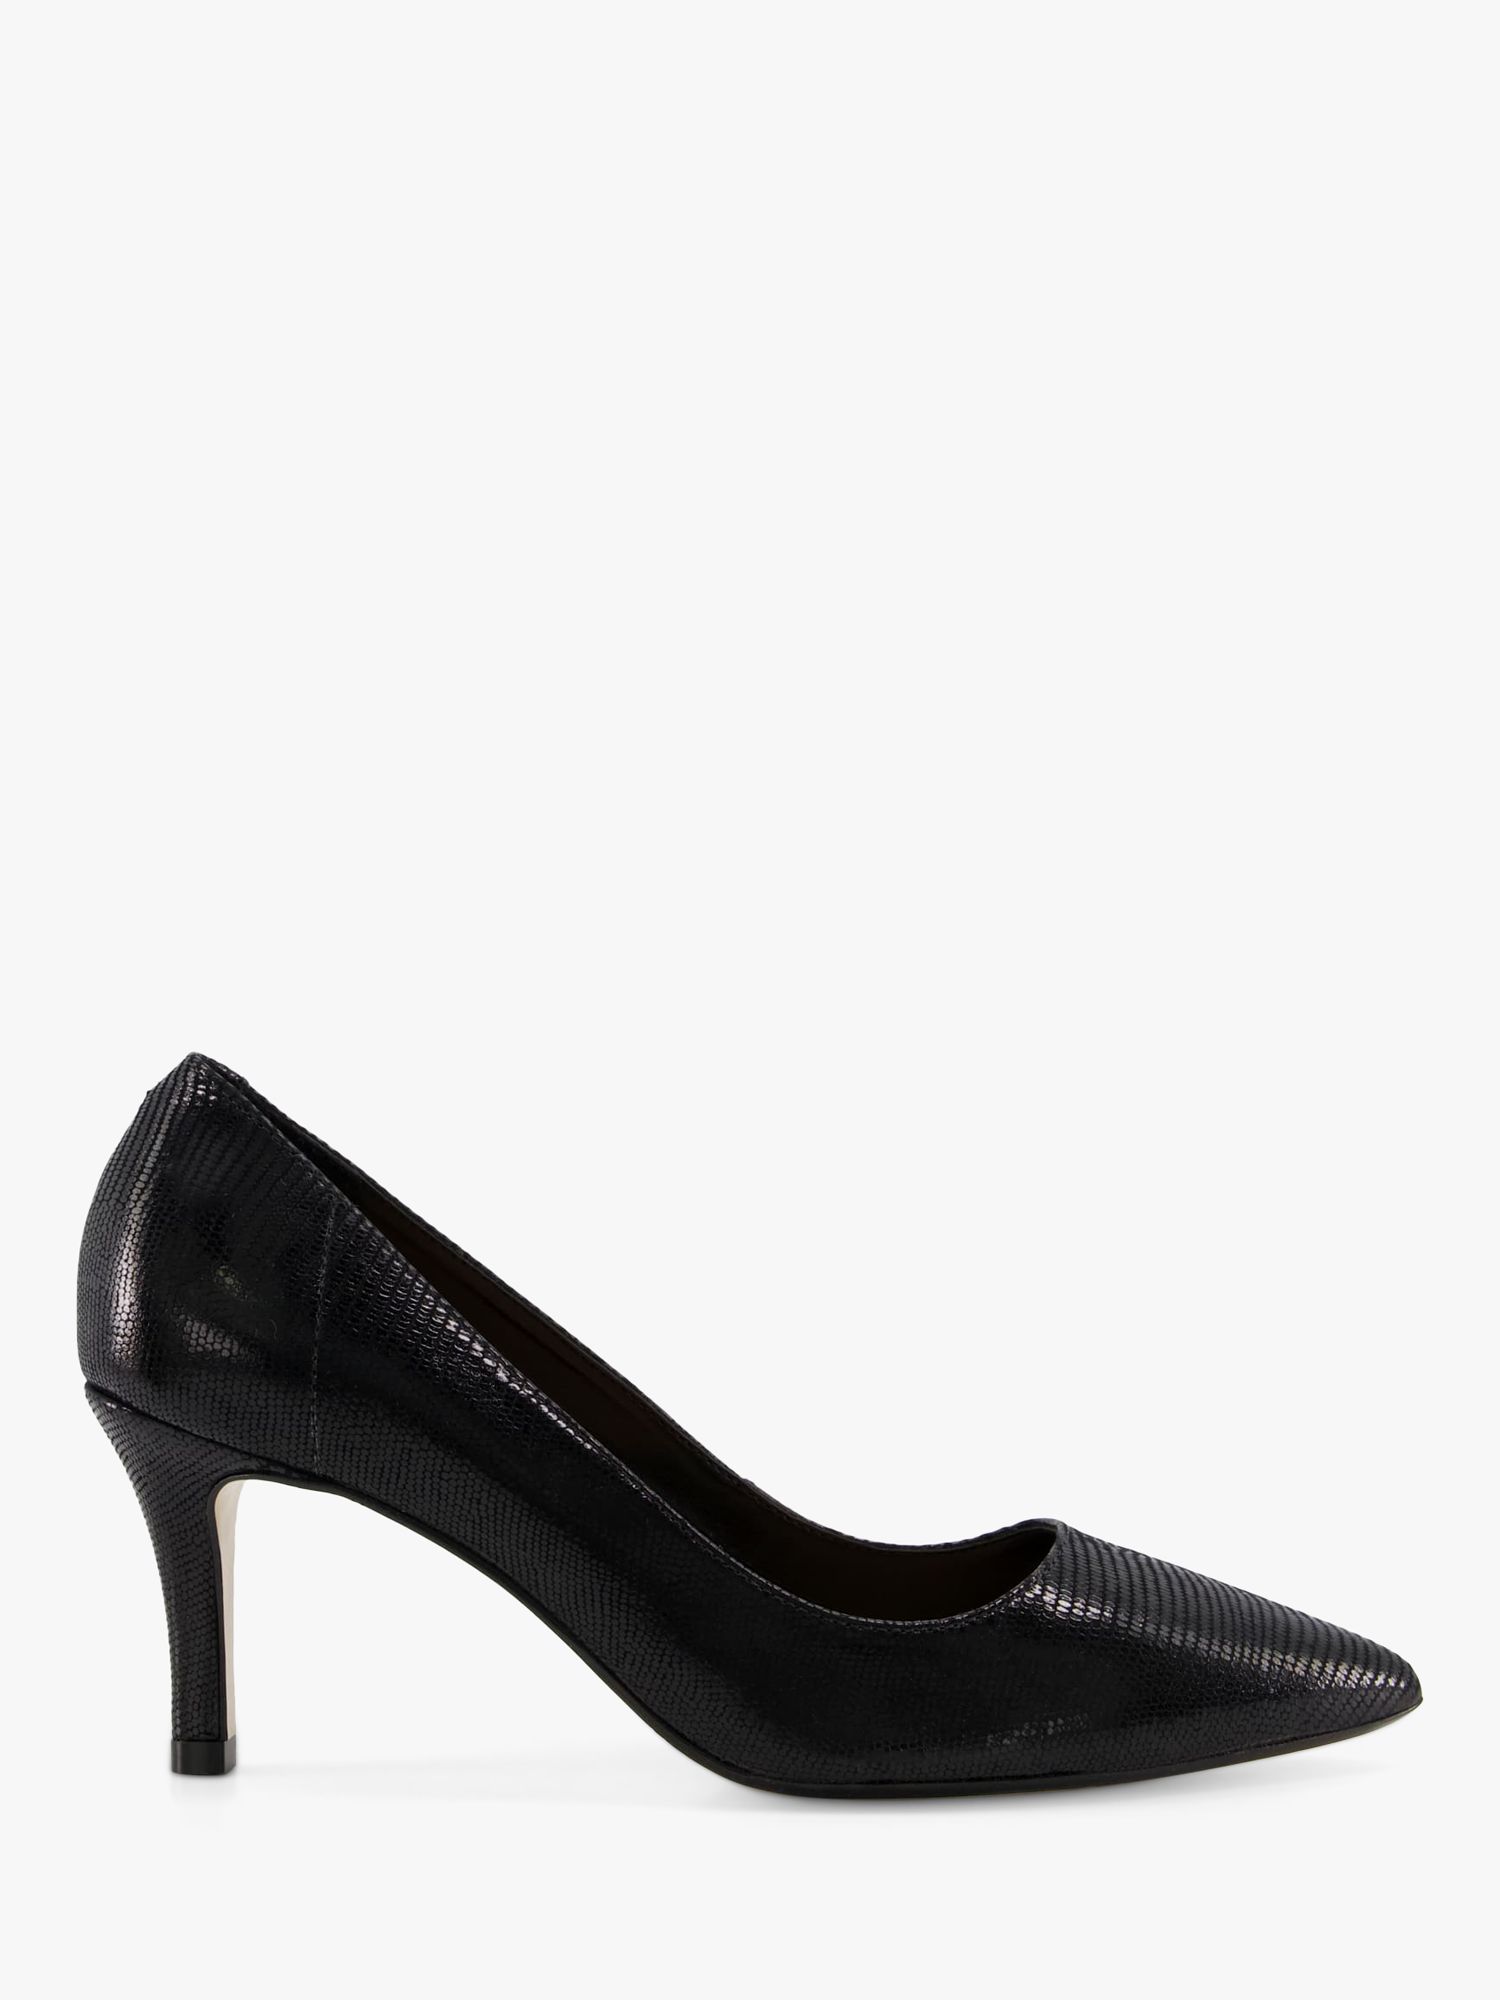 Dune Andina Leather Court Shoes, Black, 3